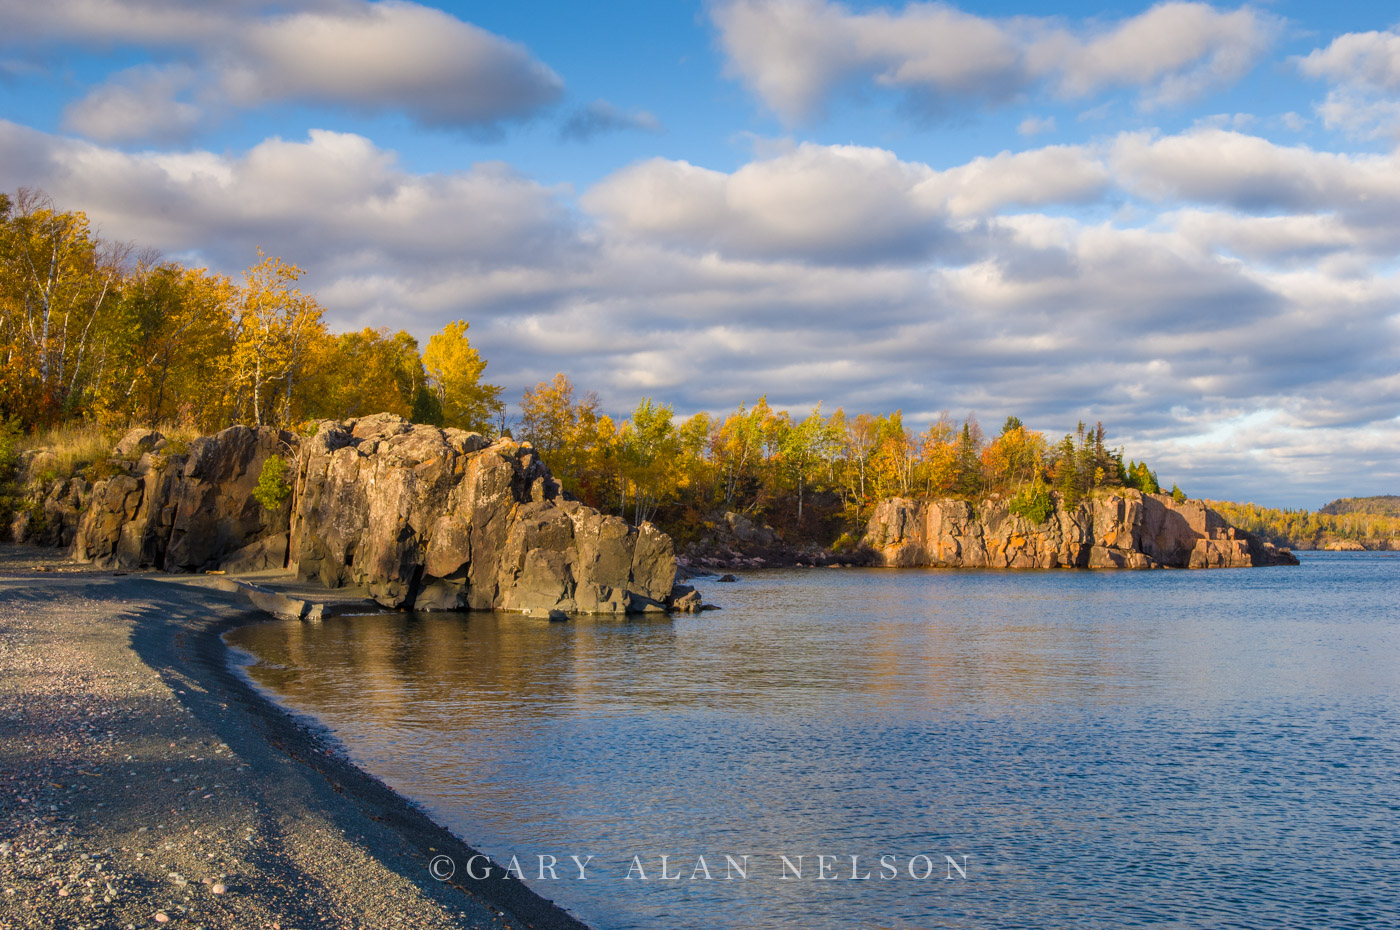 Beach and rock outcroppings on Lake Superior, Minnesota